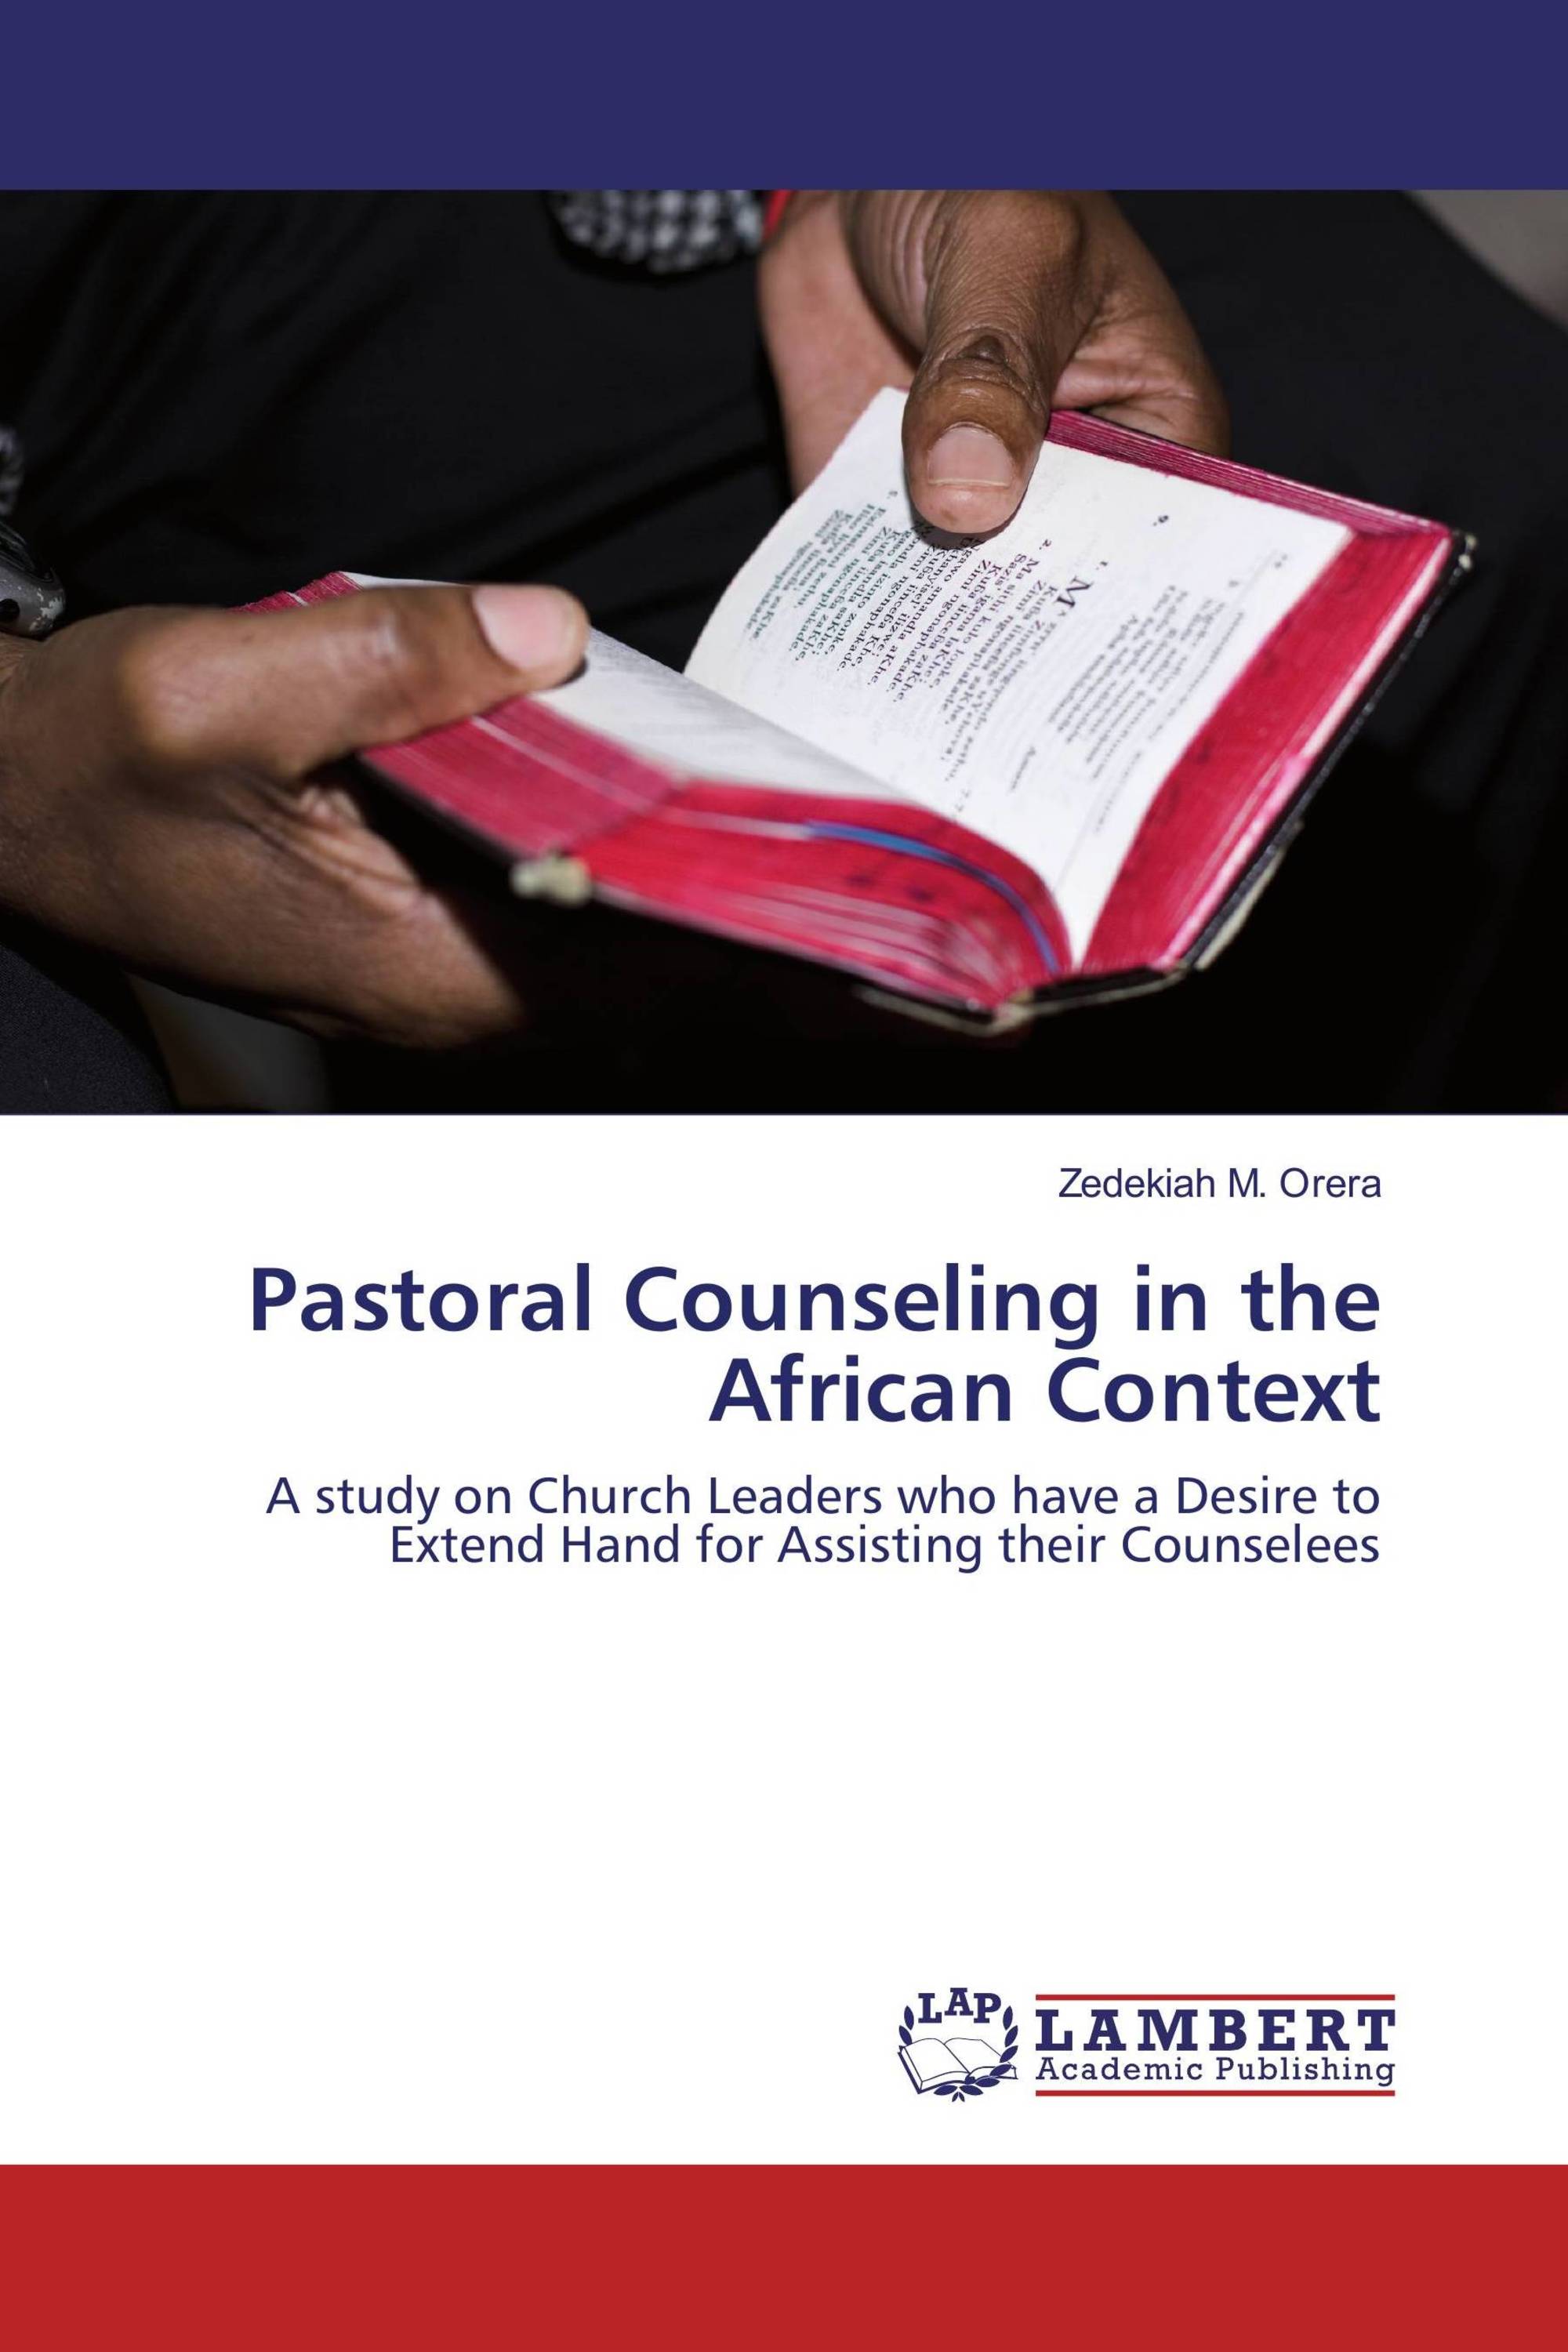 Dissertation pastoral counseling